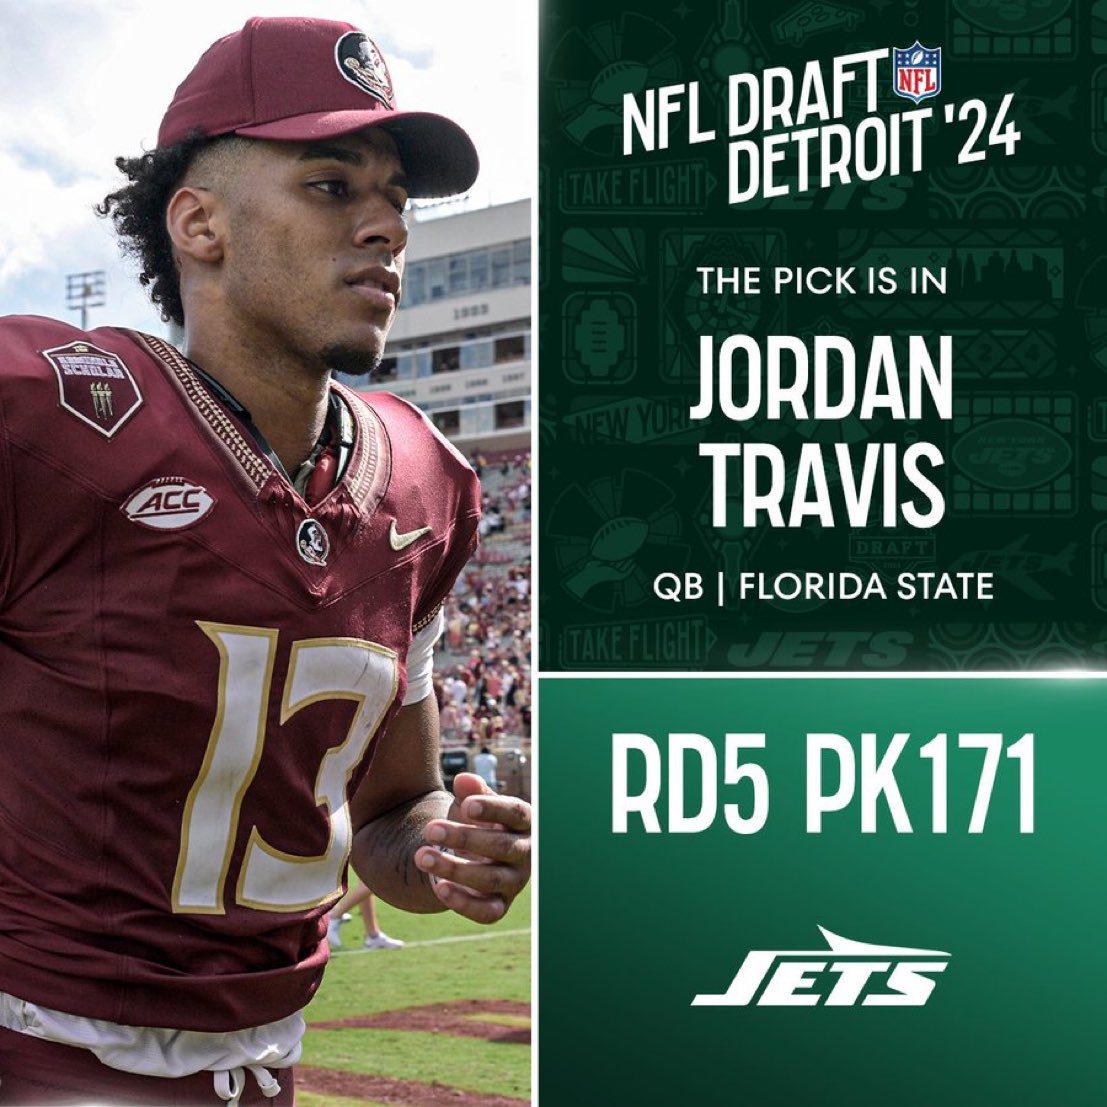 Just woke up again but Jordan Travis just made sense for the Jets. Developmental guy who’s obviously had the injuries but is a perfect QB3 candidate. Throw the dart and see what happens